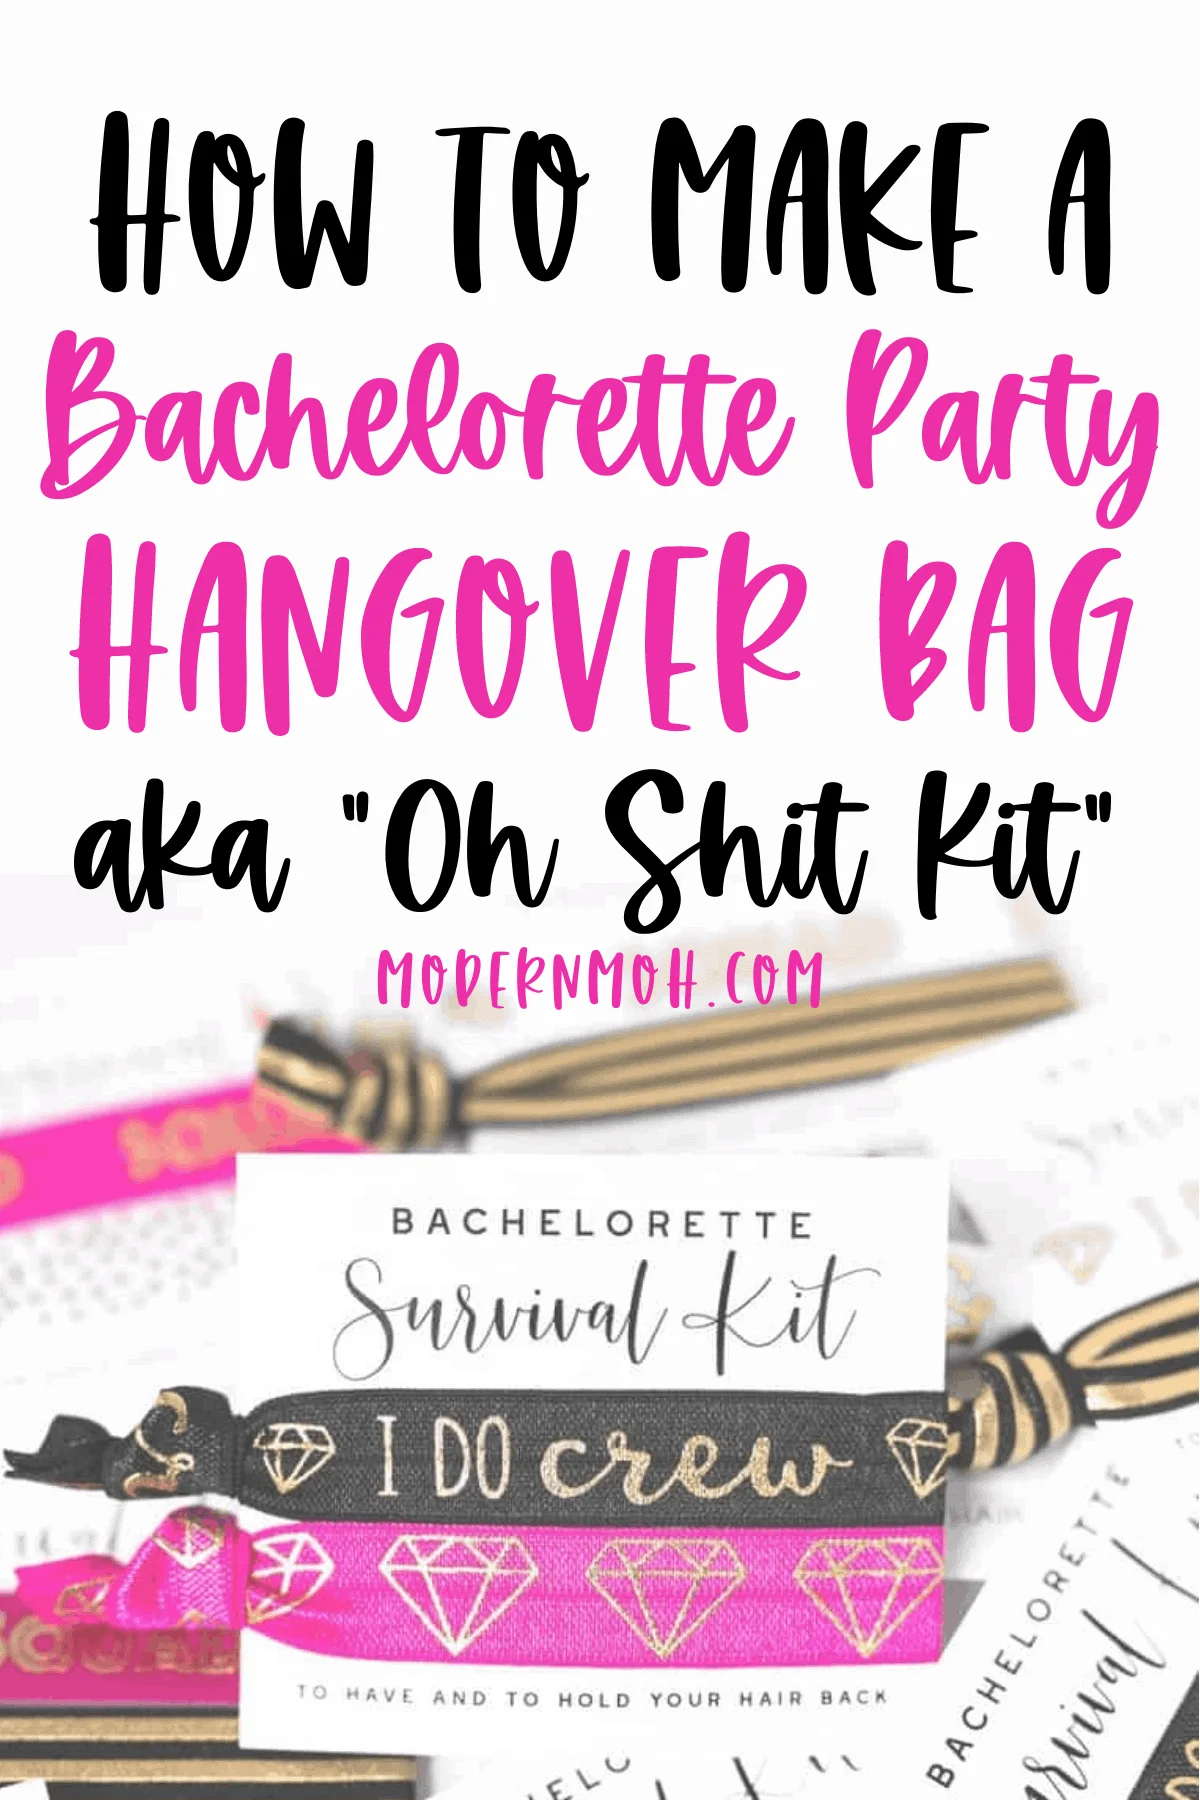 Bachelorette Survival 101: How to Build an “Oh Shit Kit”